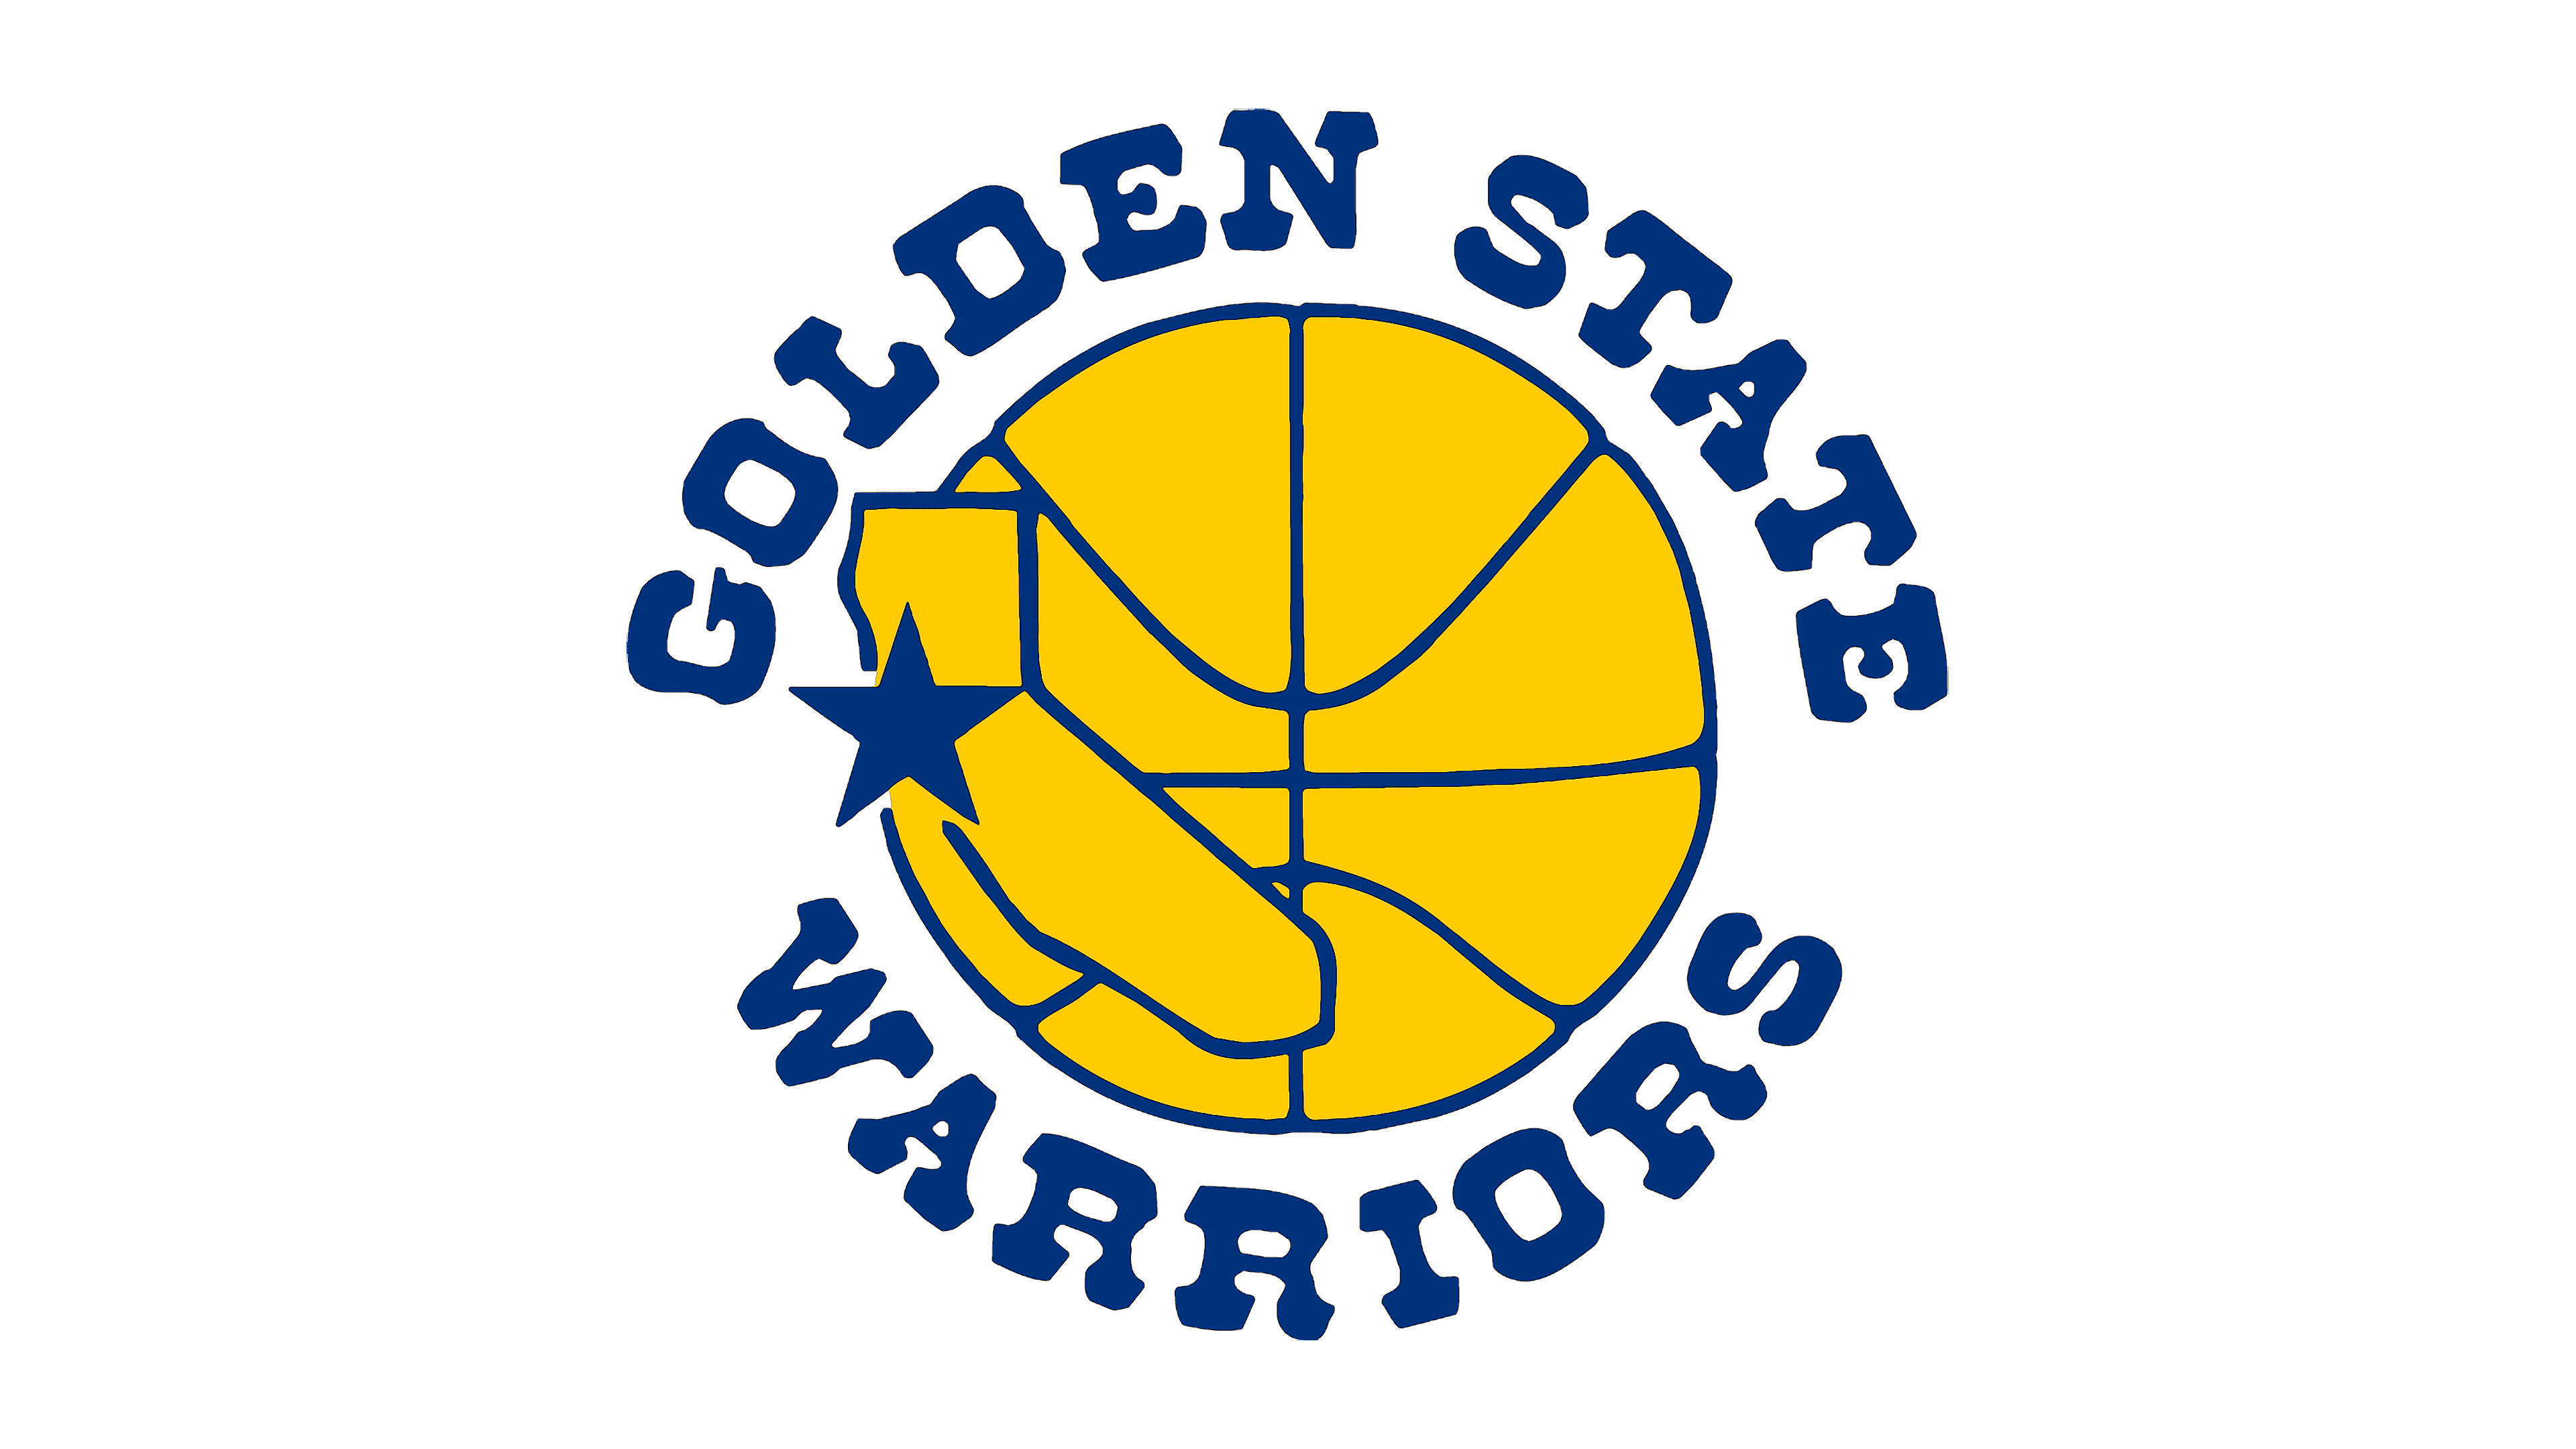 Golden State Warriors - The stripes The colors The history The